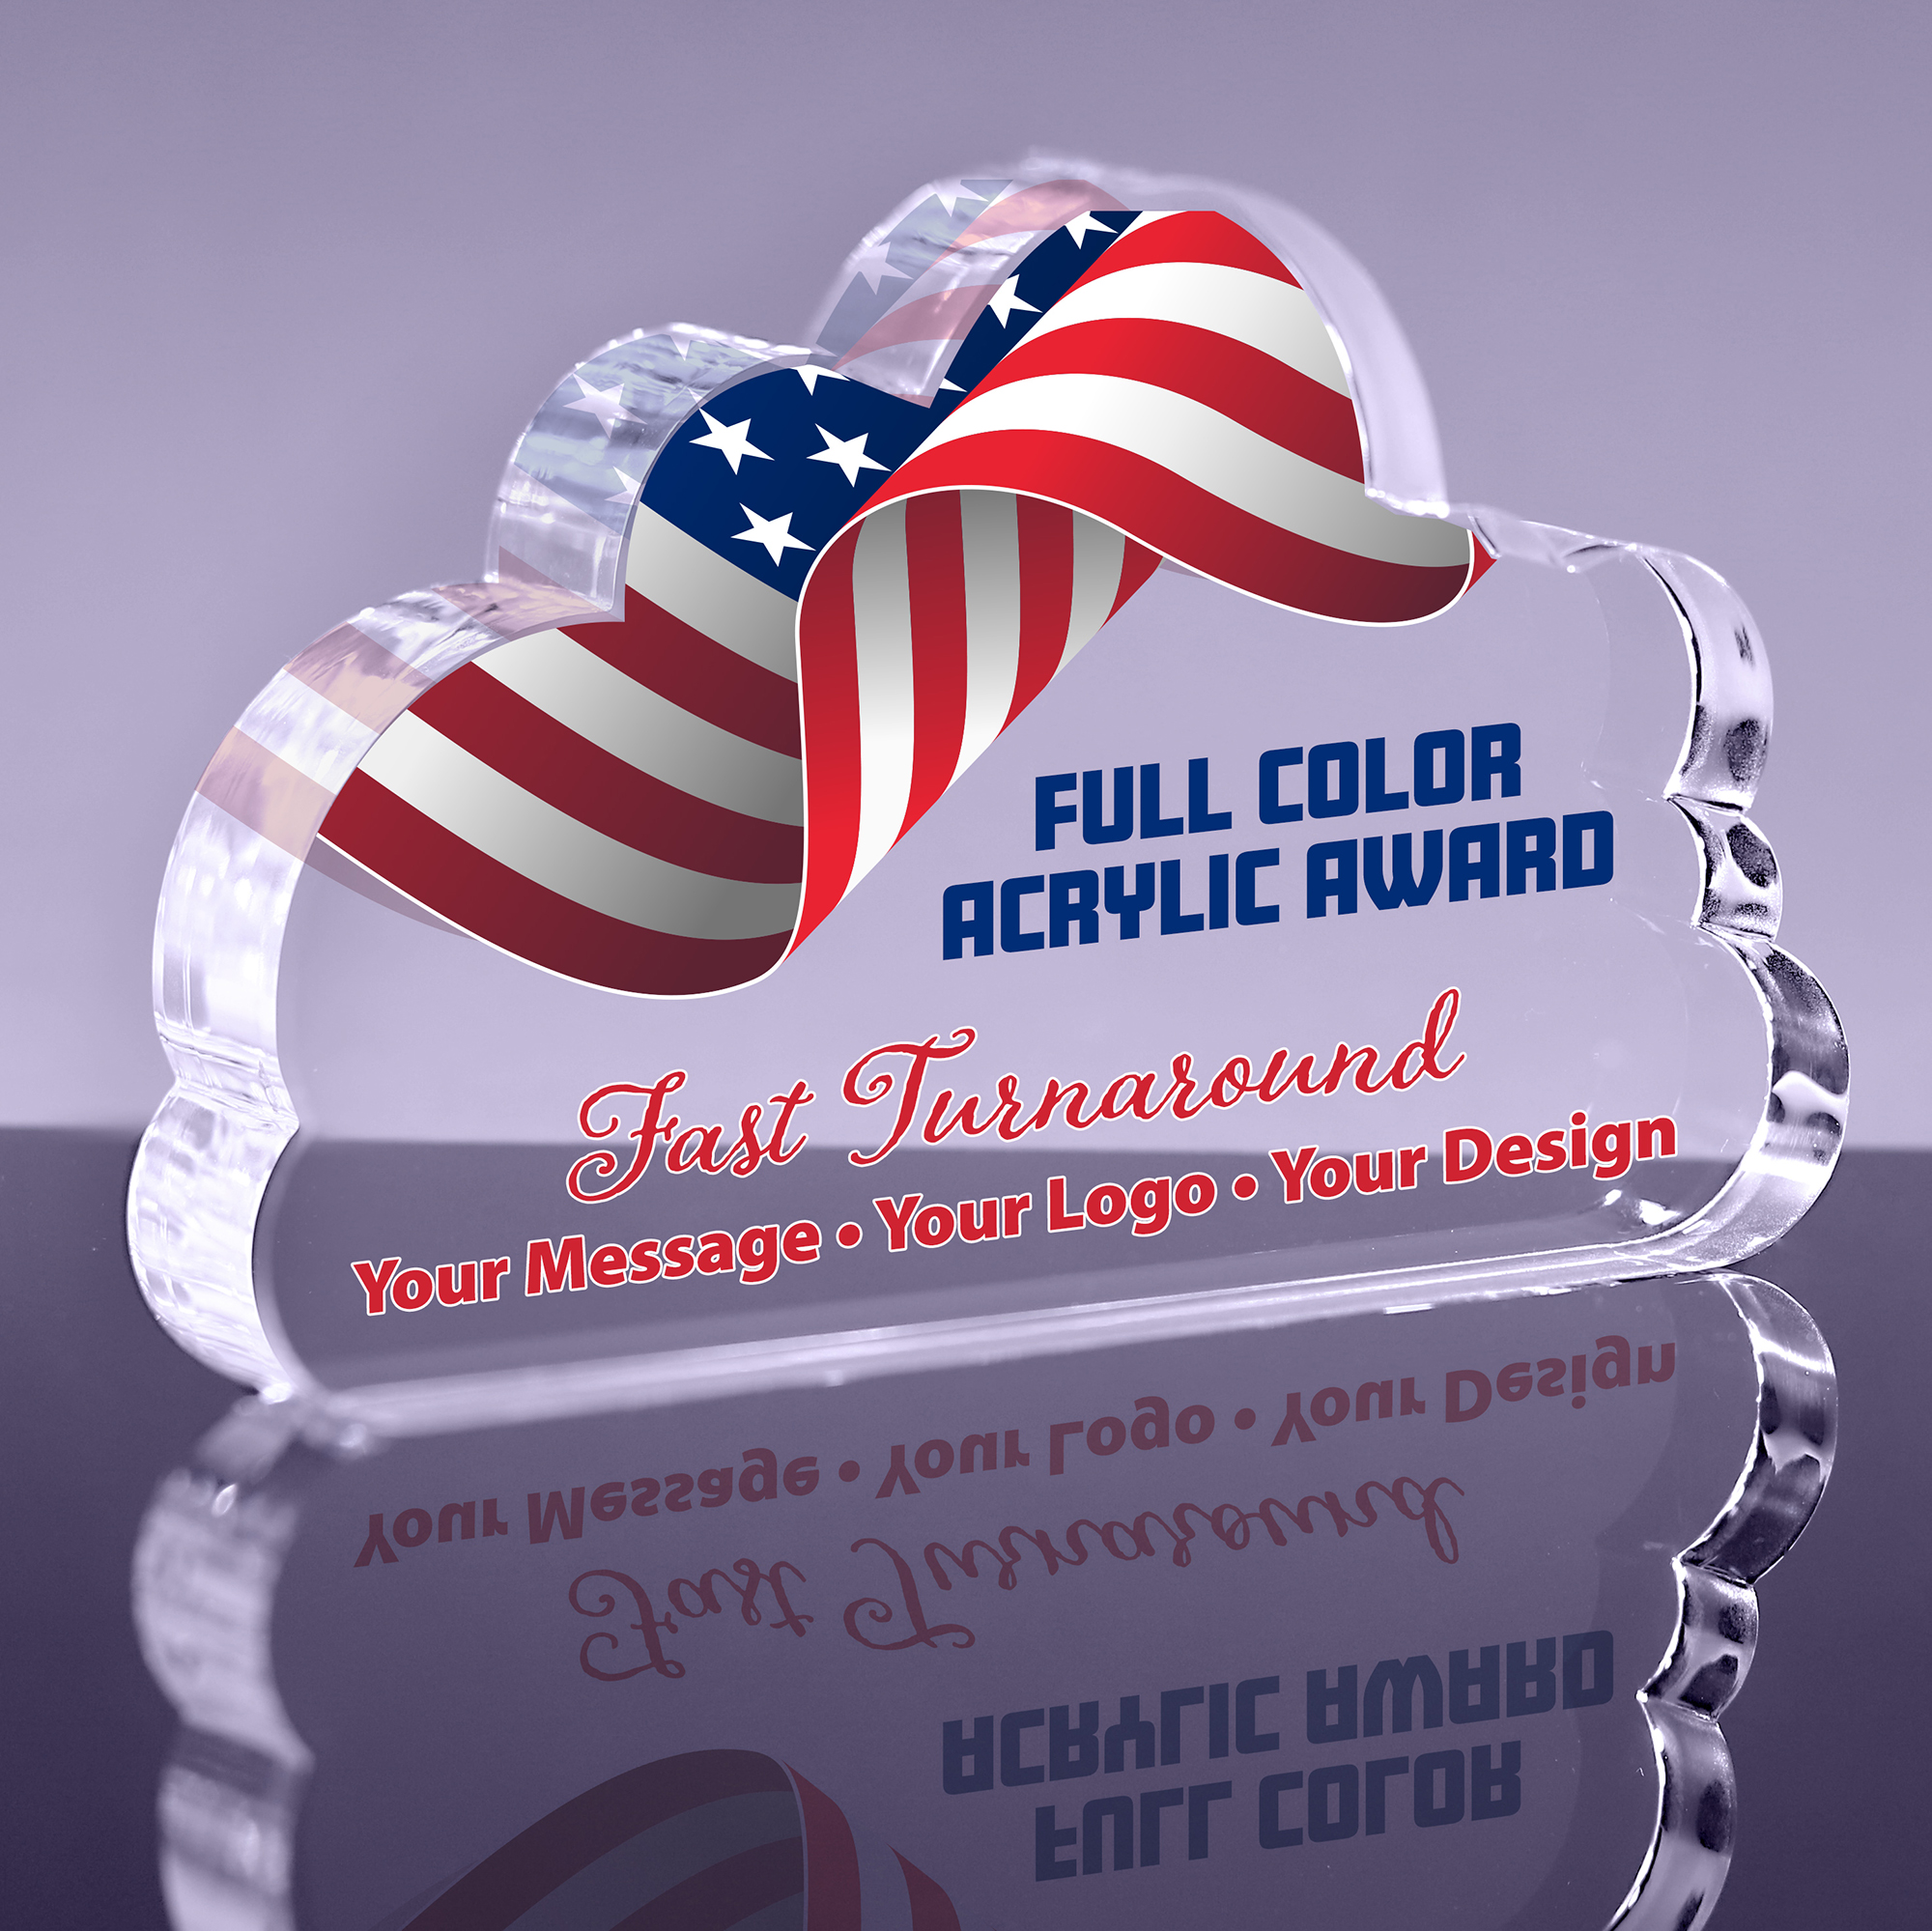 1 inch Thick Acrylic Cloud Award - 7.5 inch Color